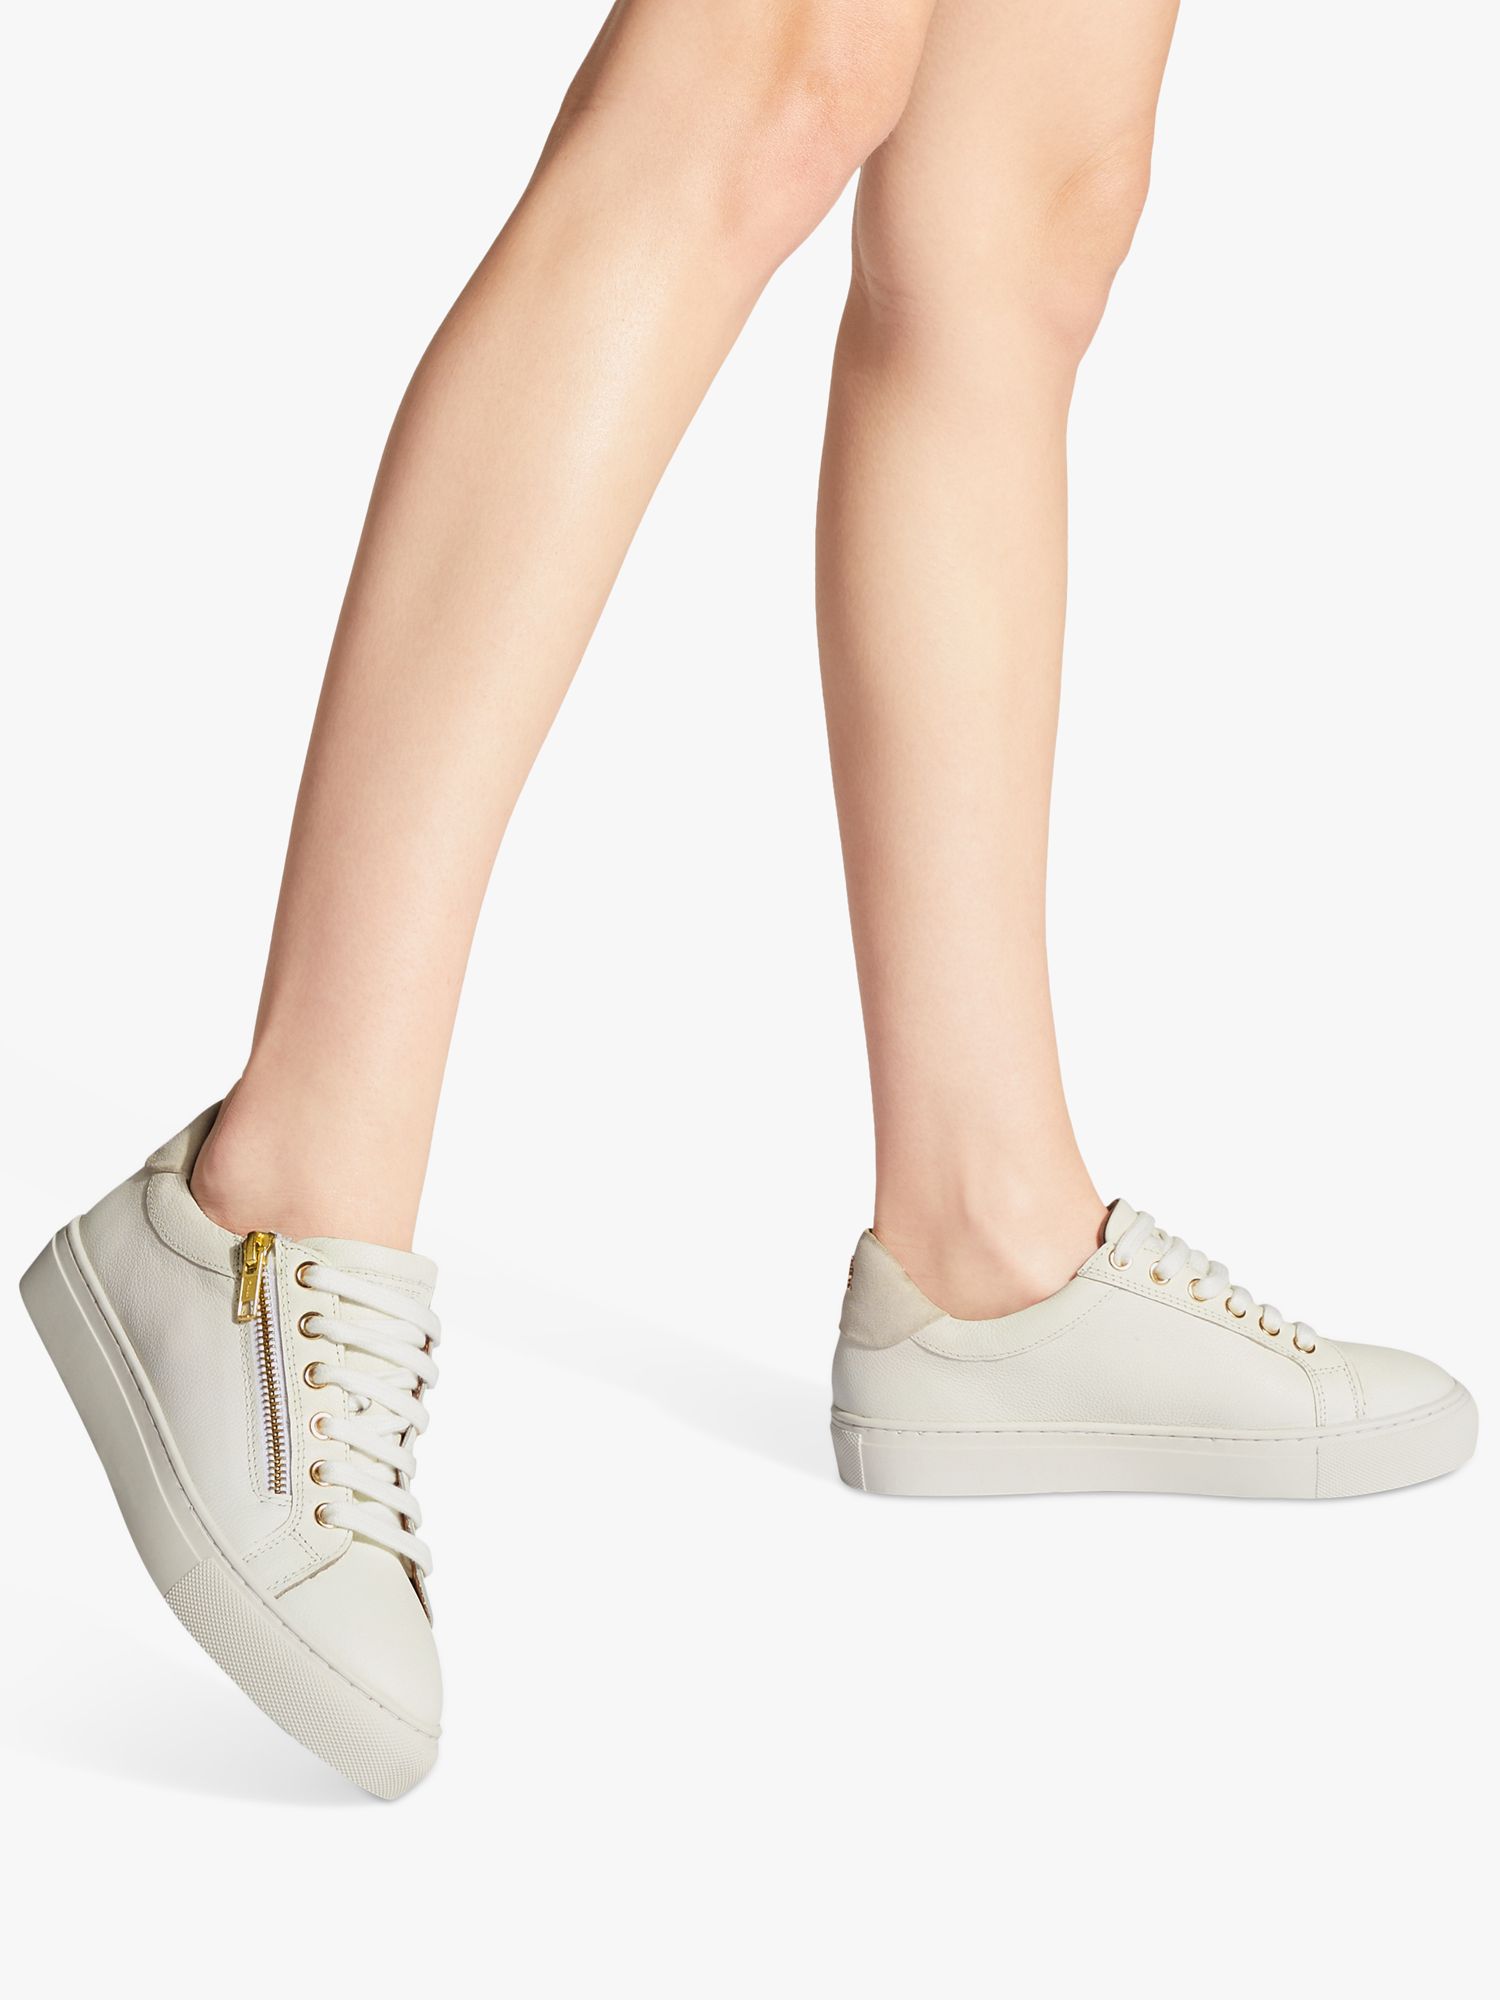 Buy KG Kurt Geiger Dulwich Leather Zip Trainers, White Online at johnlewis.com